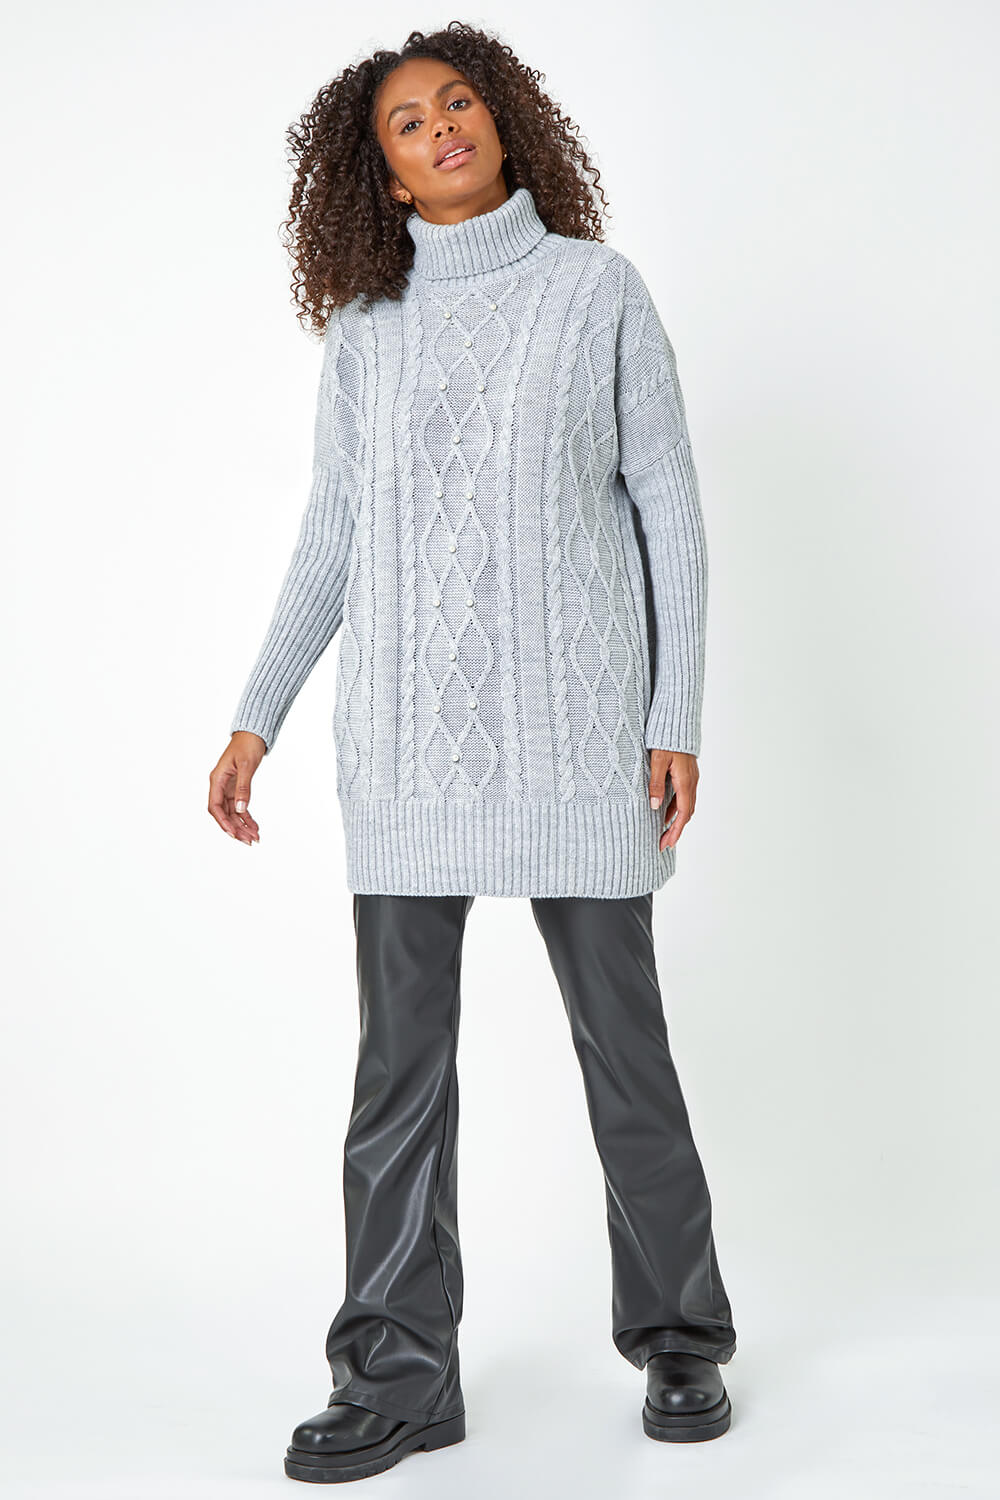 Grey Pearl Embellished Cable Knit Longline Jumper, Image 4 of 5